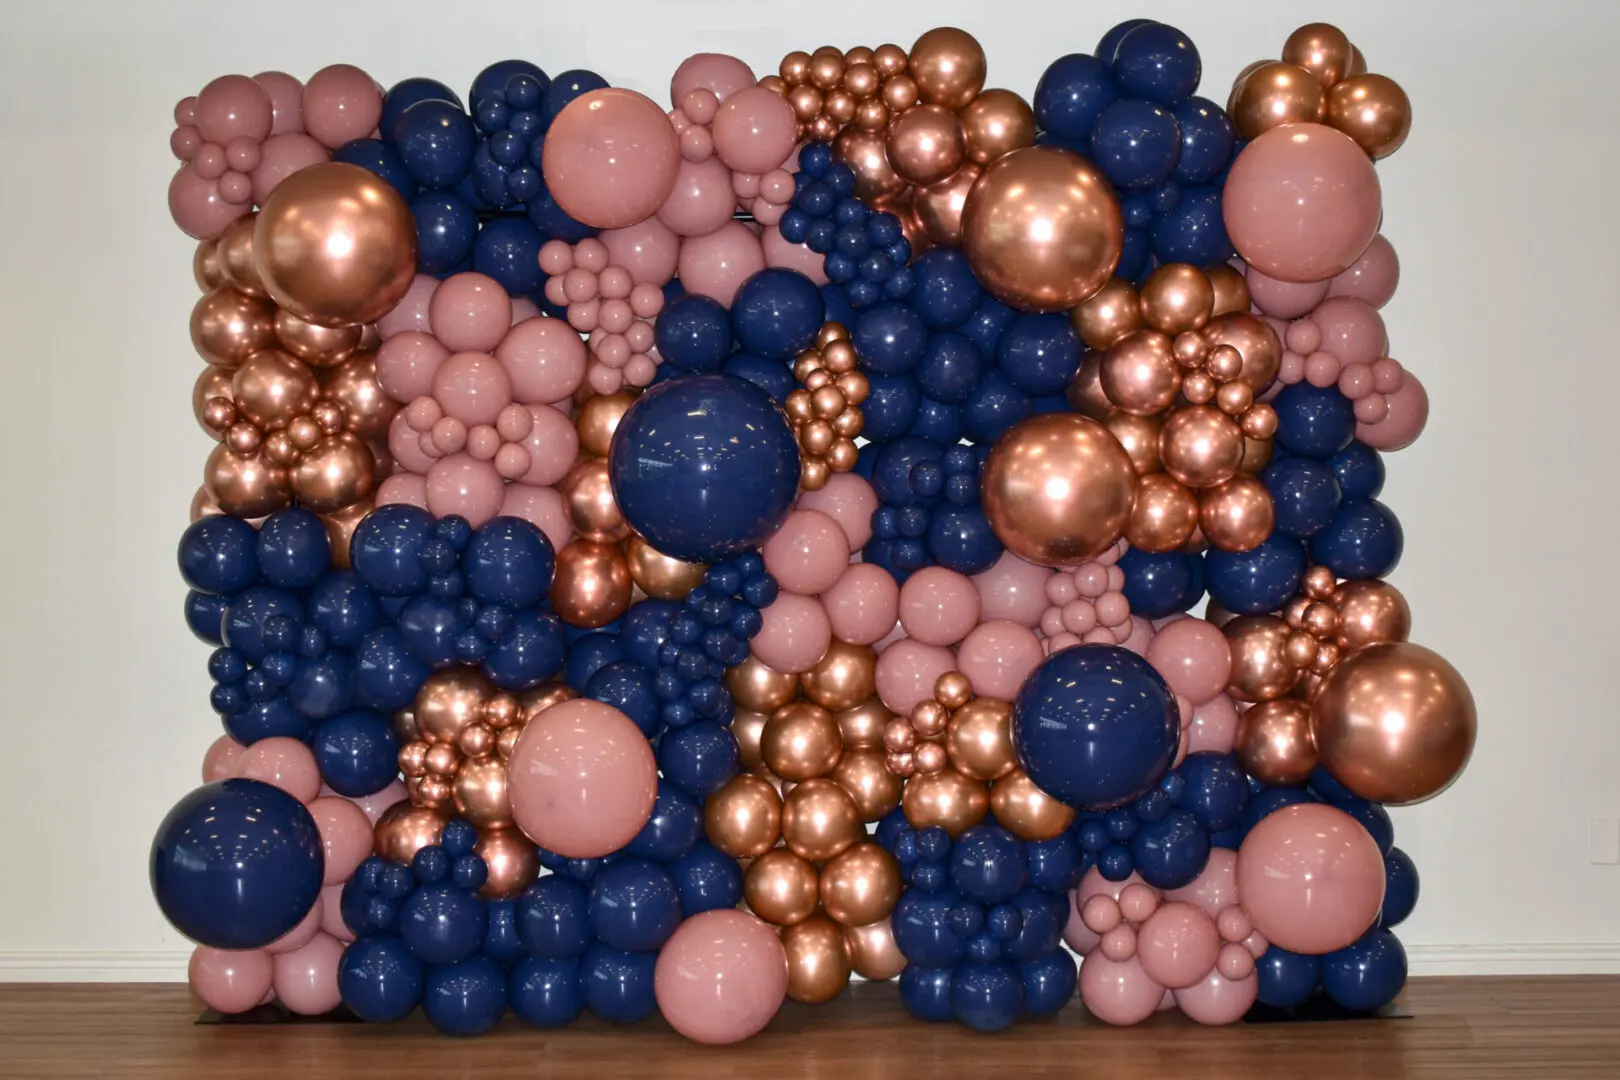 A Wall With Pink and Blue Color Balloons